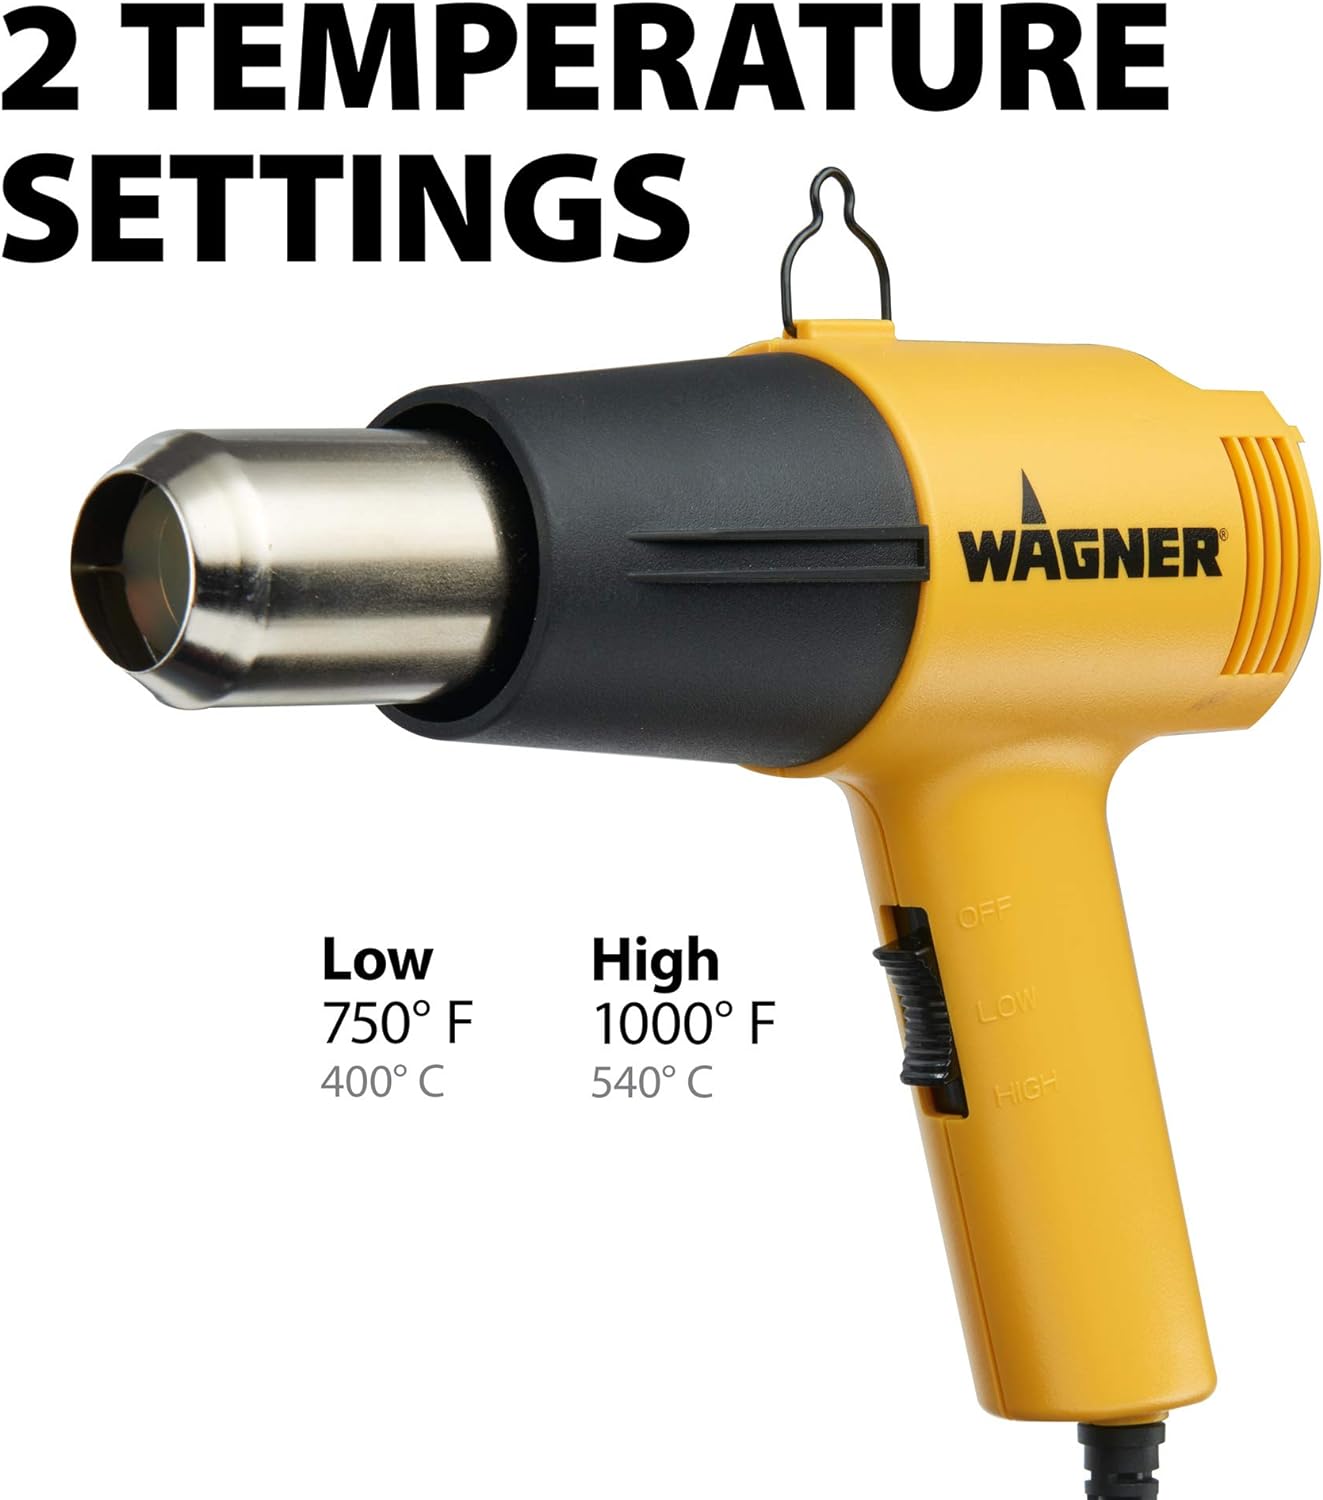 Wagner Heat Gun Kit Wagner Spraytech 2417344 HT1000 With 3 Nozzles Included, 2 Temp Settings 750ᵒF & 1000ᵒF, Great for Shrink Wrap,